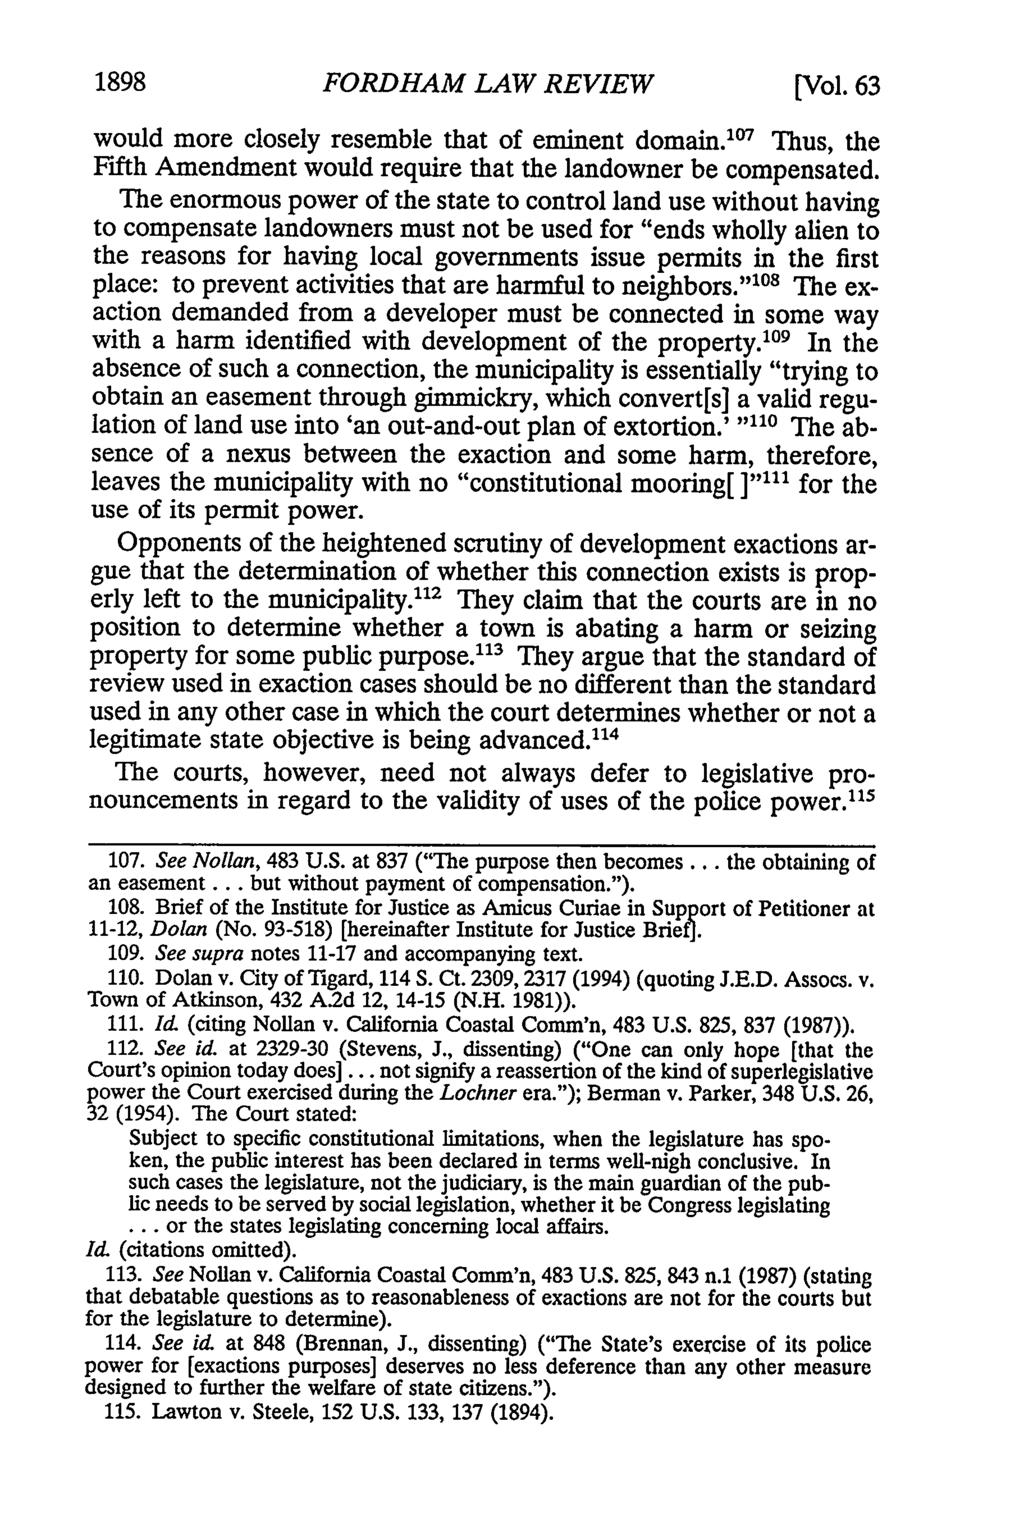 1898 FORDHAM LAW REVIEW [Vol. 63 would more closely resemble that of eminent domain. 1 7 Thus, the Fifth Amendment would require that the landowner be compensated.